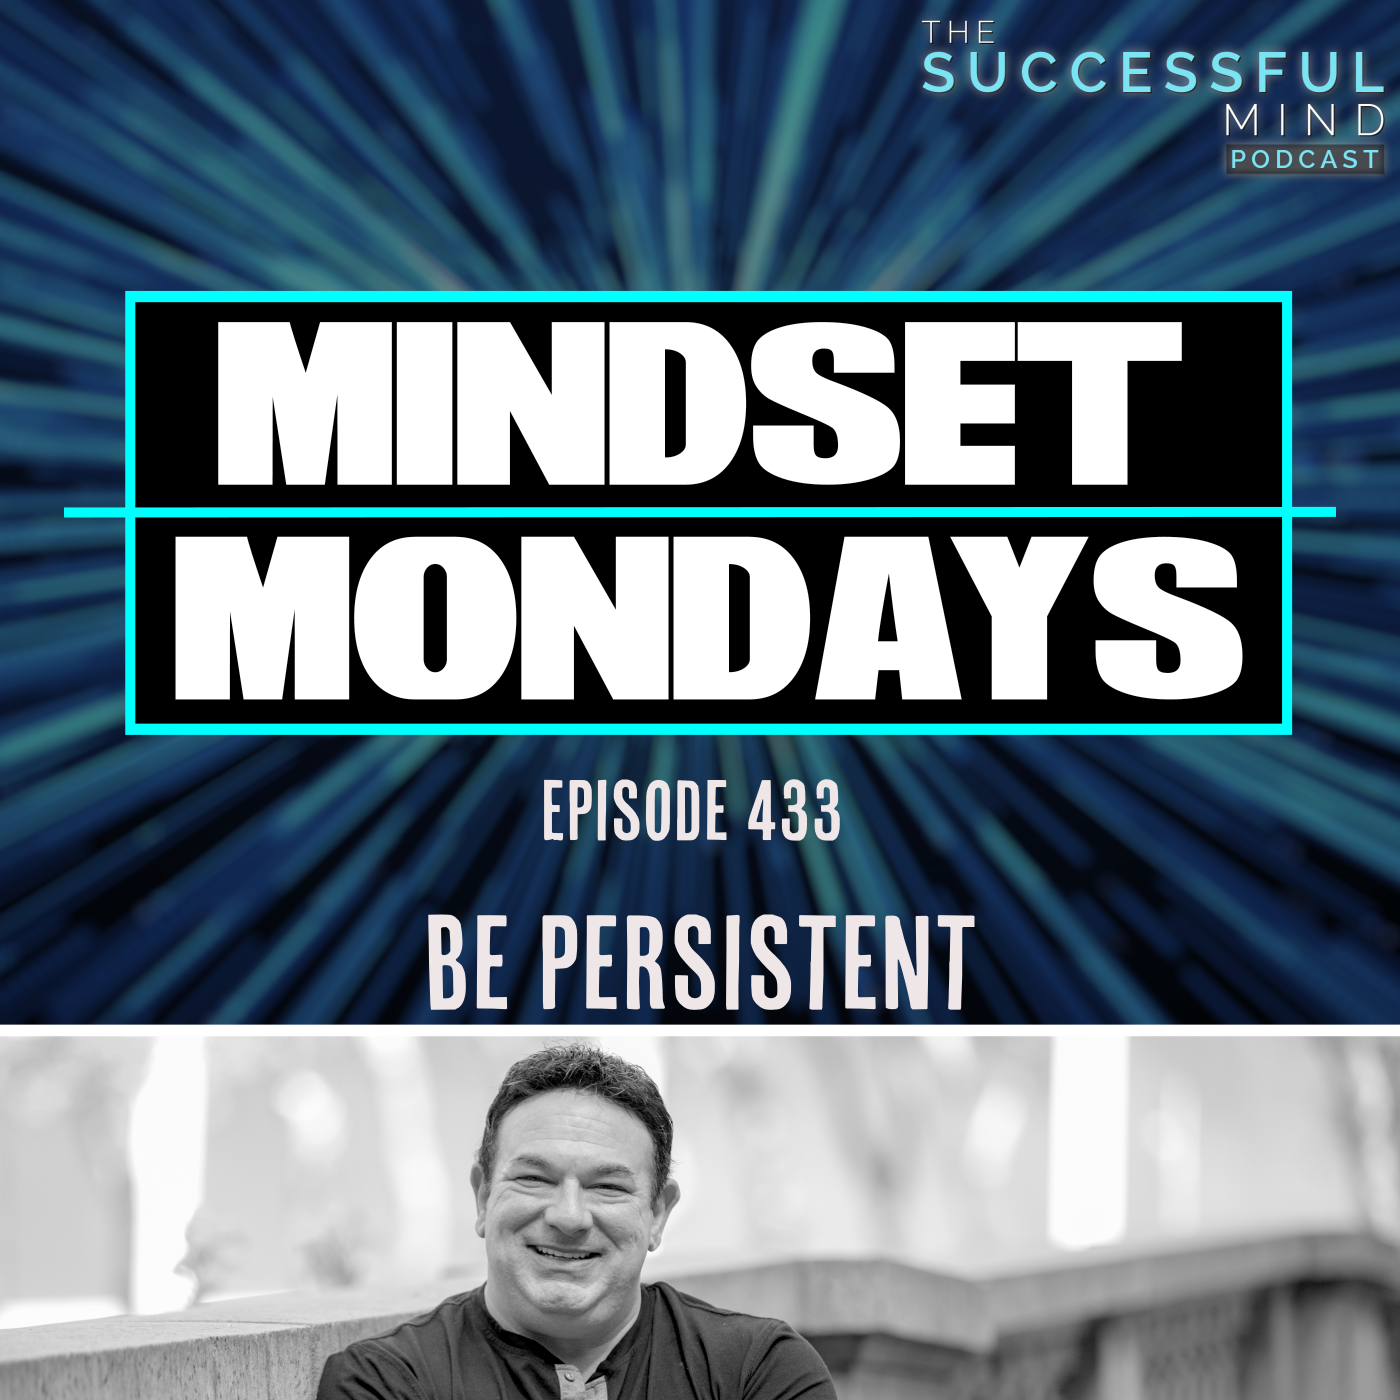 The Successful Mind Podcast - Episode 433 - Be Persistent